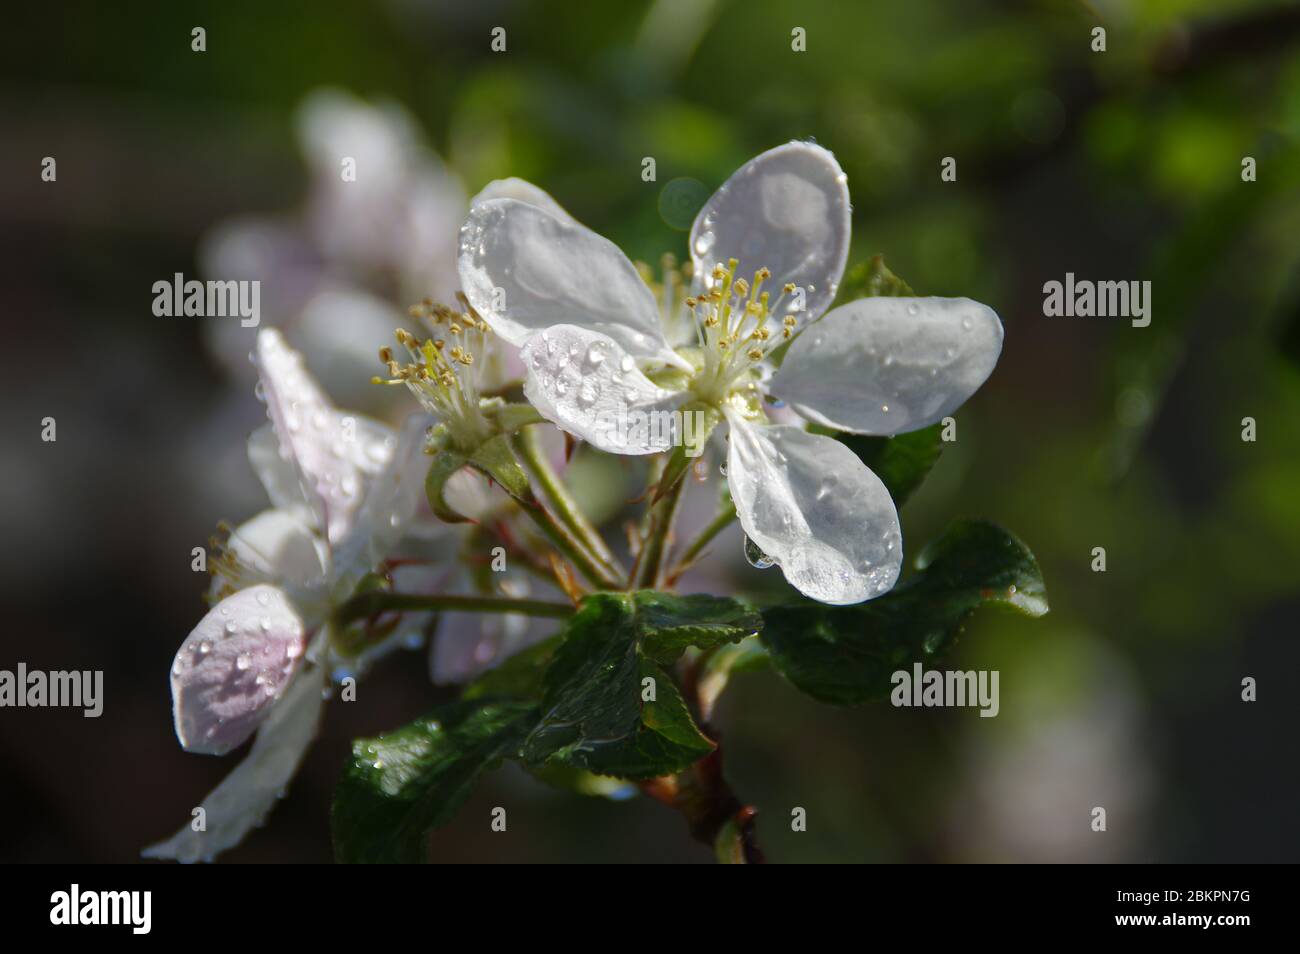 Water drops on an apple bloom after the rain. Macro view of wet fresh fruits flower in orchard. Spring season in the garden. Stock Photo